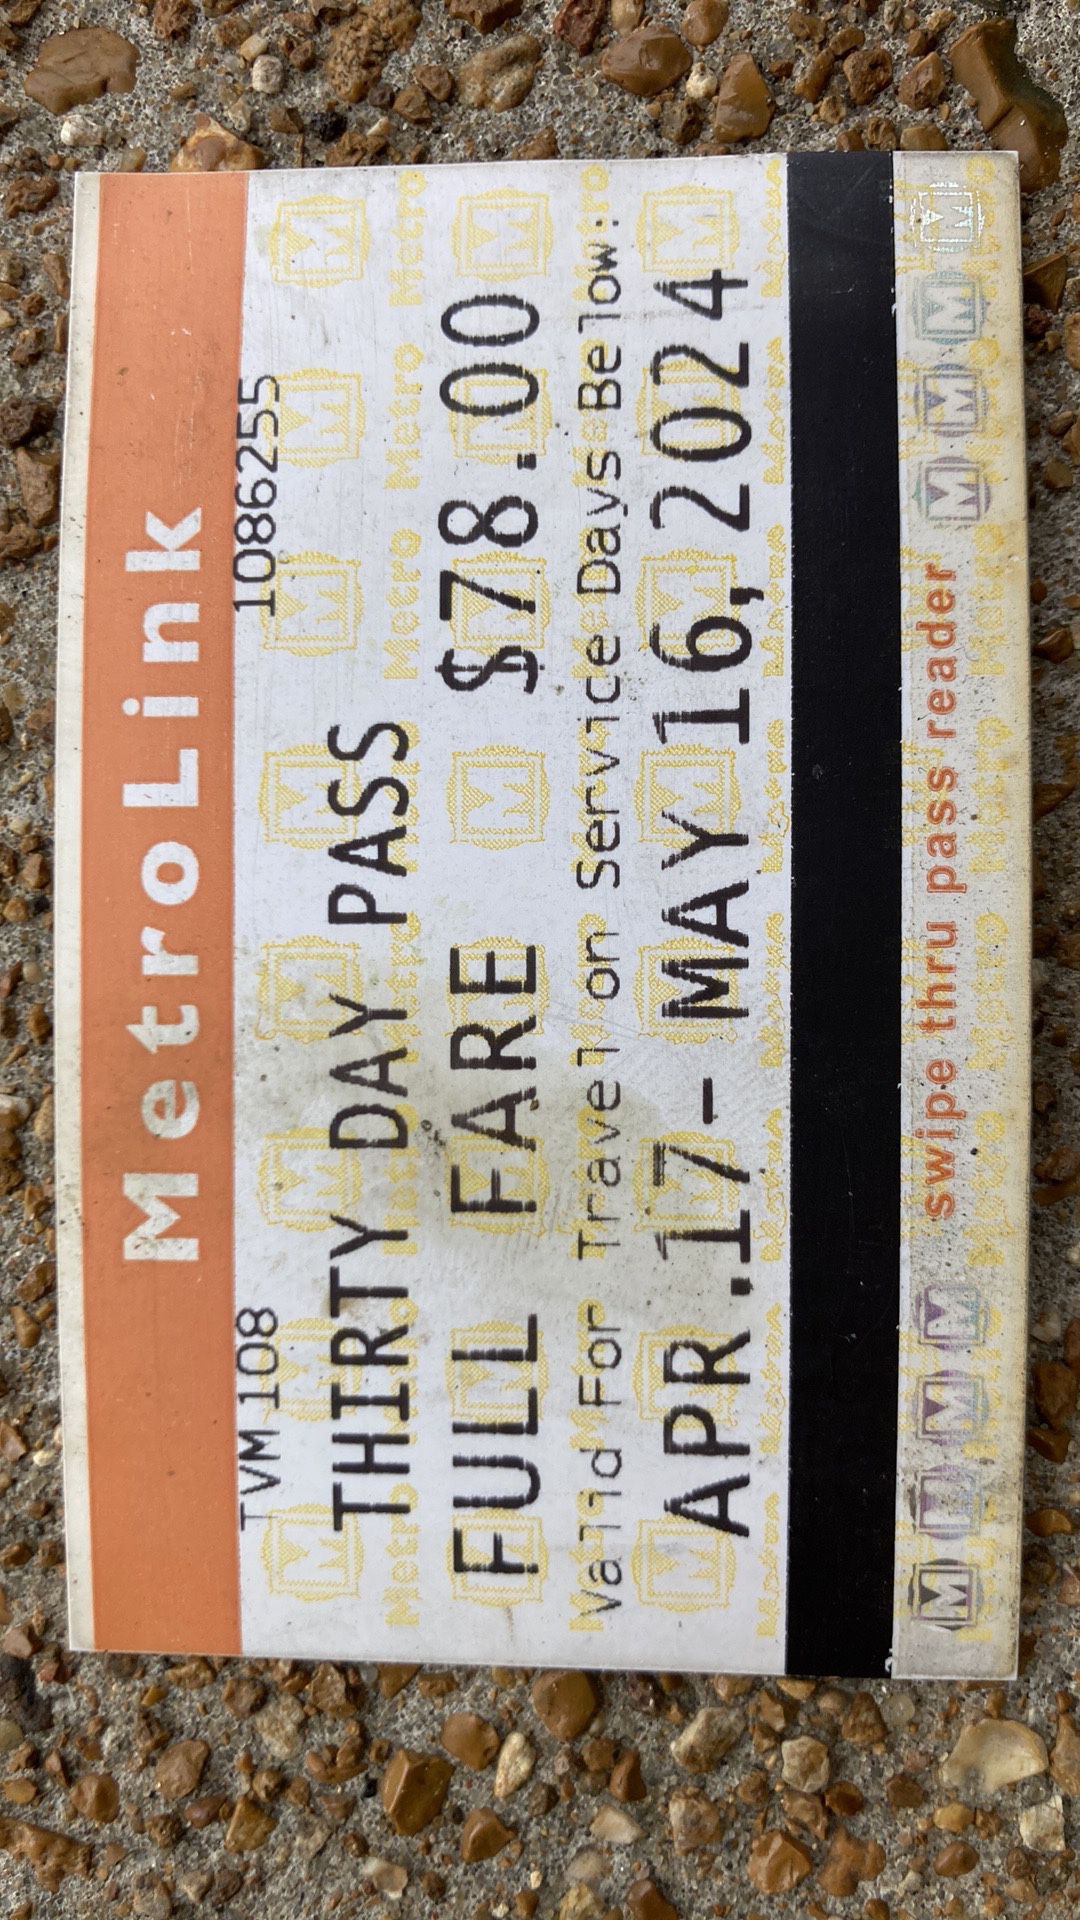 For sale, 30 day metrolink pass, Apr. 17 - May 16